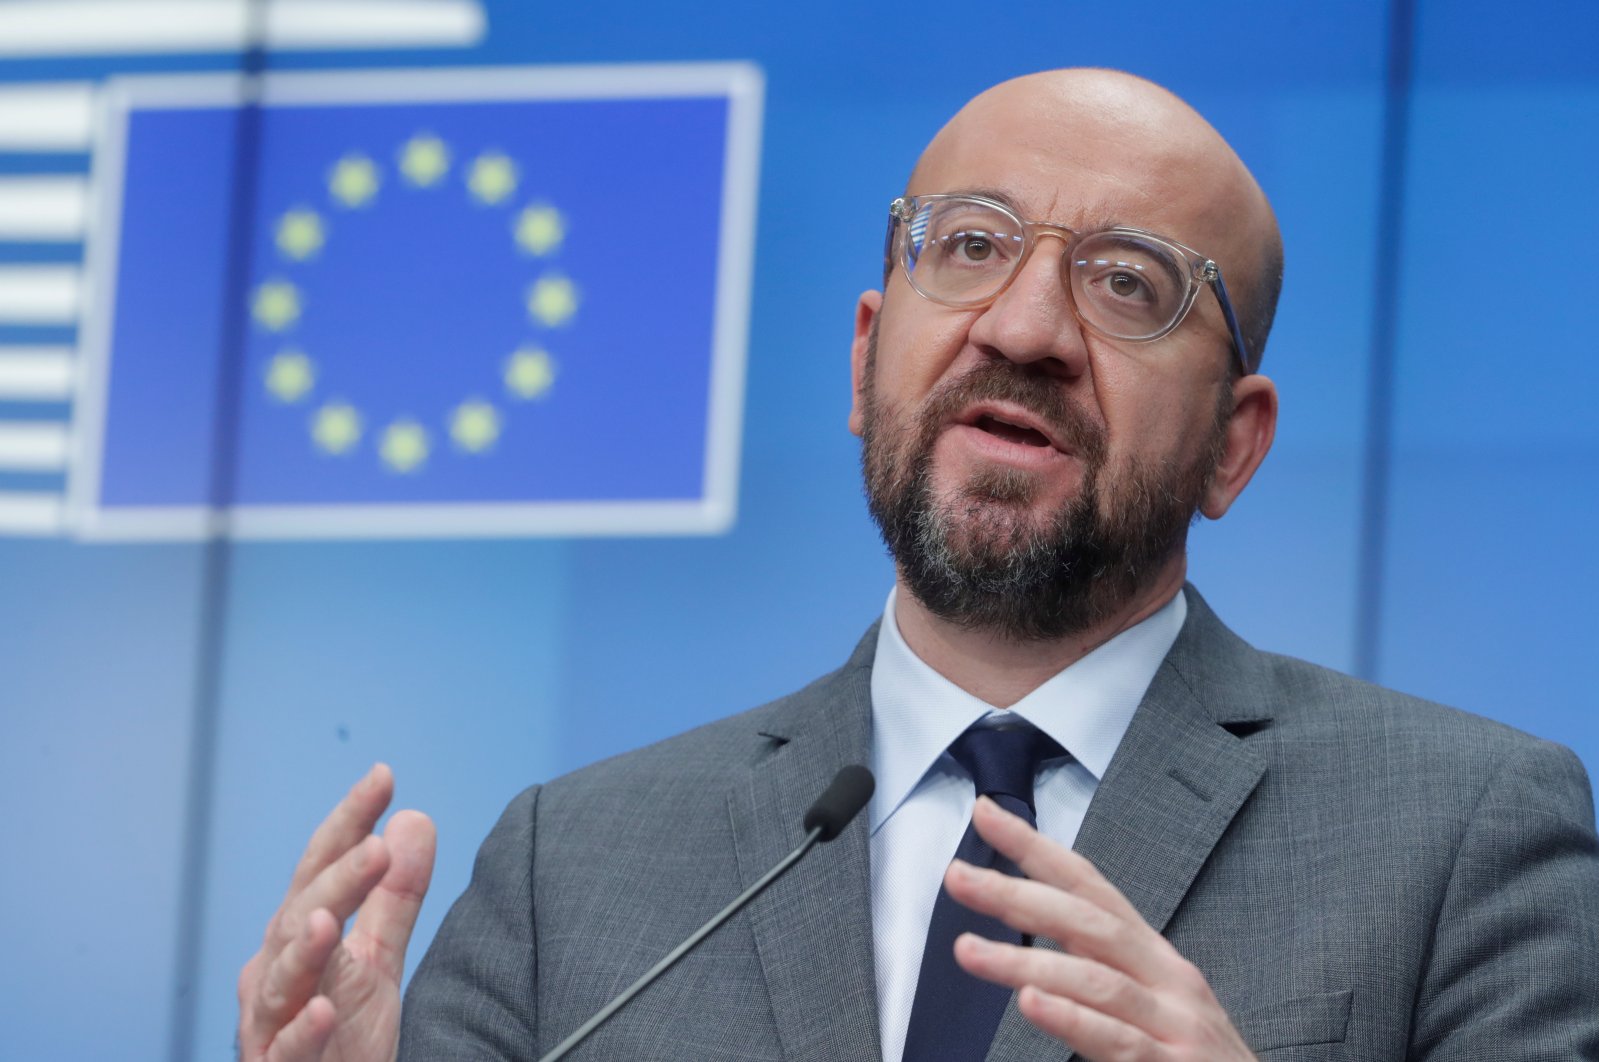 Charles Michel, President of European Council, gives a speech at the bloc's headquarters in Belgium's Brussels, Jan. 21 2021. (Reuters Photo)